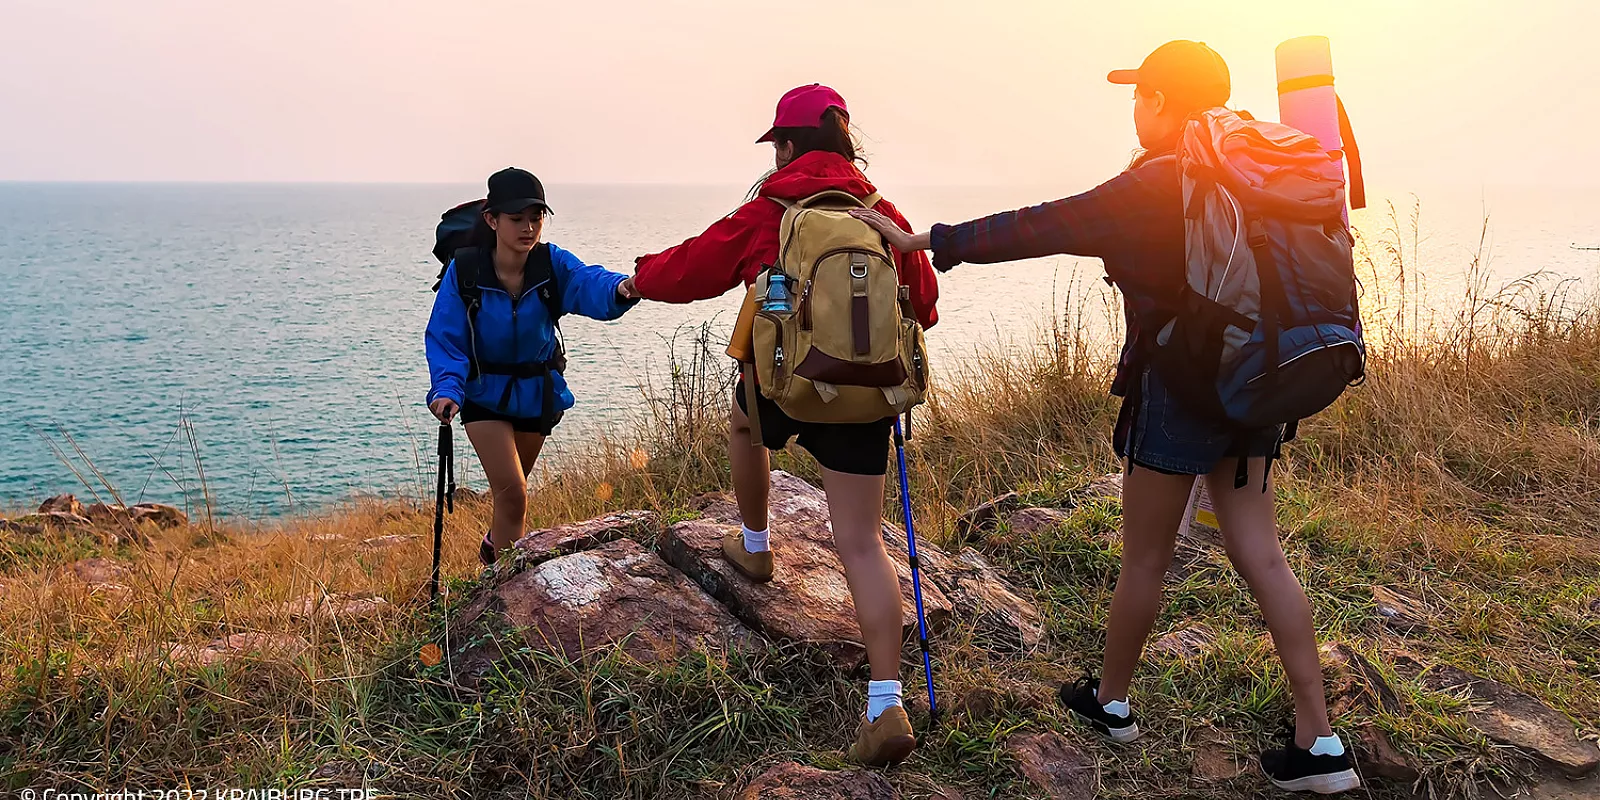 Hiking gear makes strides with TPE